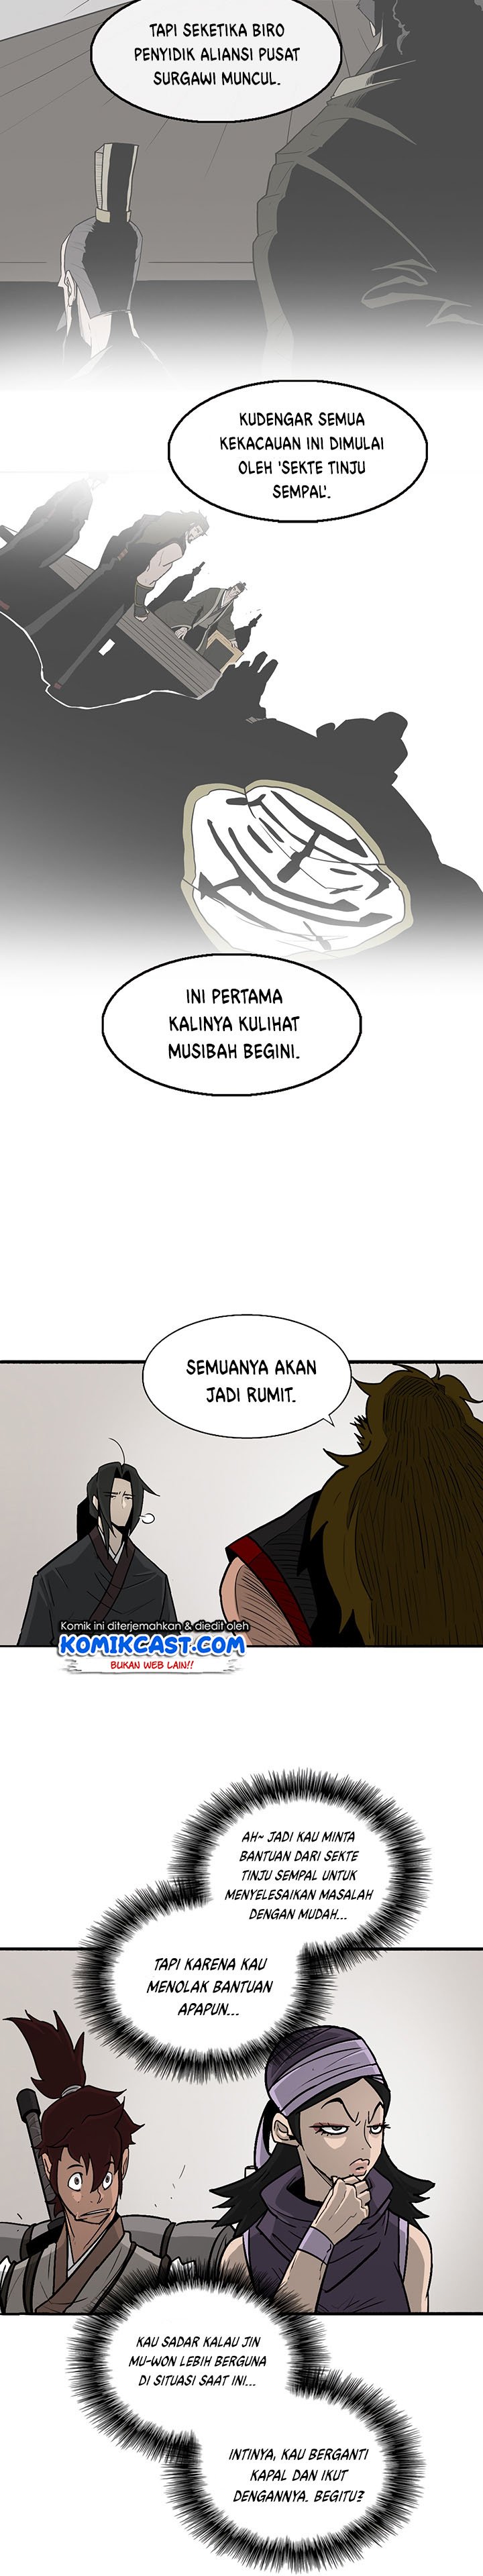 Legend of the Northern Blade Chapter 51